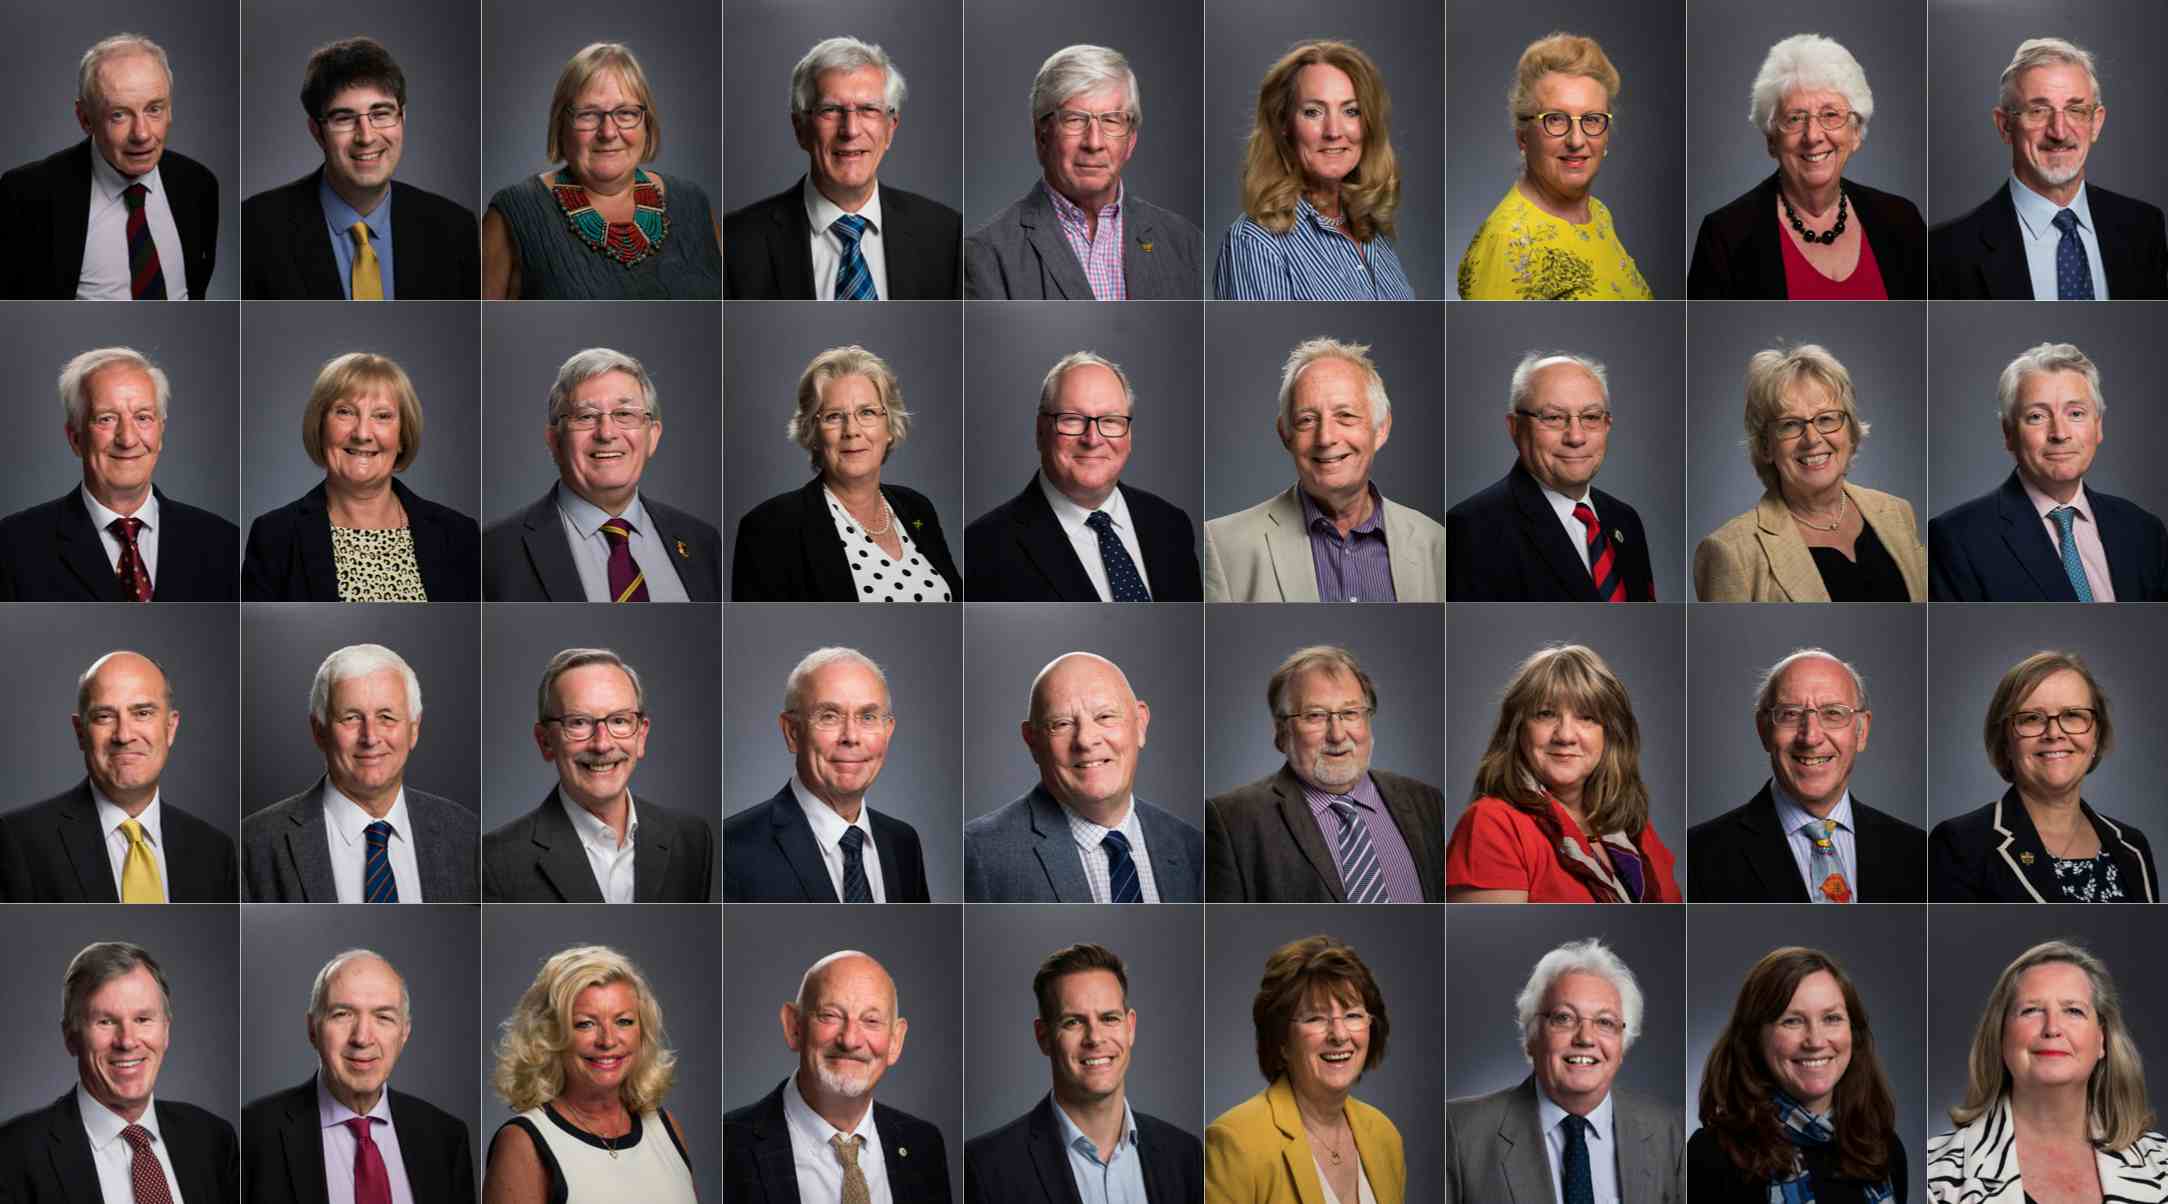 Meet your new Councillors (if you live near me)